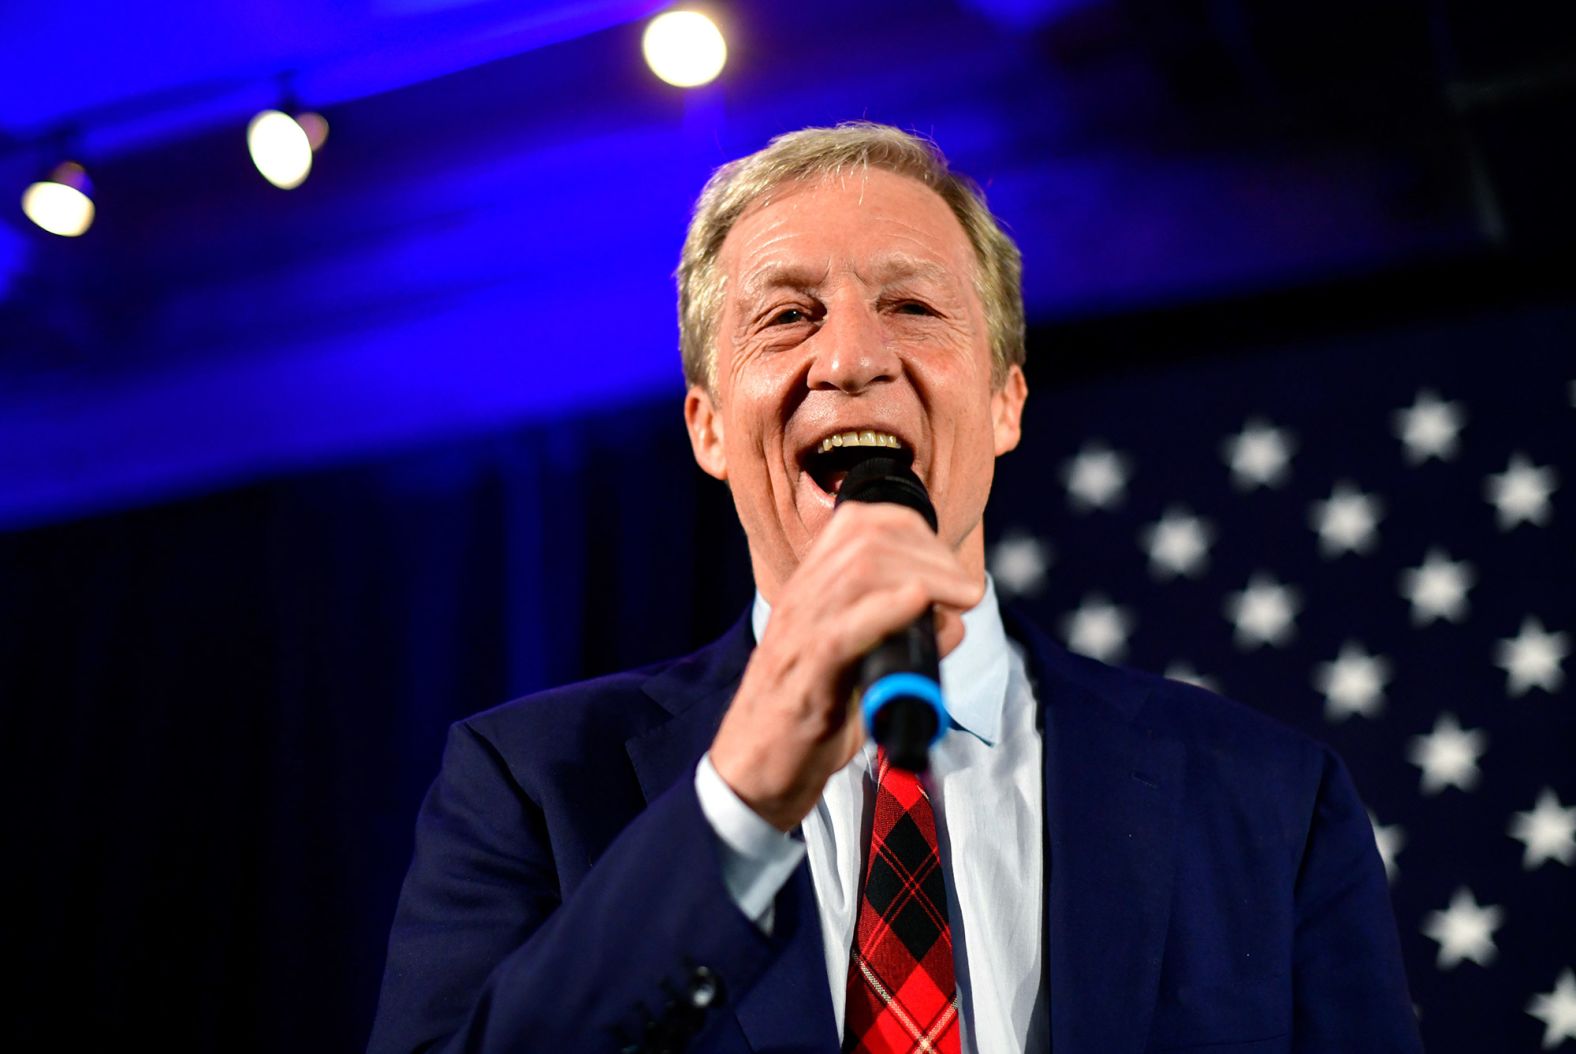 As results were still coming in, billionaire businessman Tom Steyer announced Saturday that he was <a href="index.php?page=&url=https%3A%2F%2Fwww.cnn.com%2F2020%2F02%2F29%2Fpolitics%2Ftom-steyer-drops-out-2020-race%2Findex.html" target="_blank">dropping out of the race.</a> "I said if I didn't see a path to winning that I'd suspend my campaign," he said. "And honestly, I can't see a path where I can win the presidency."